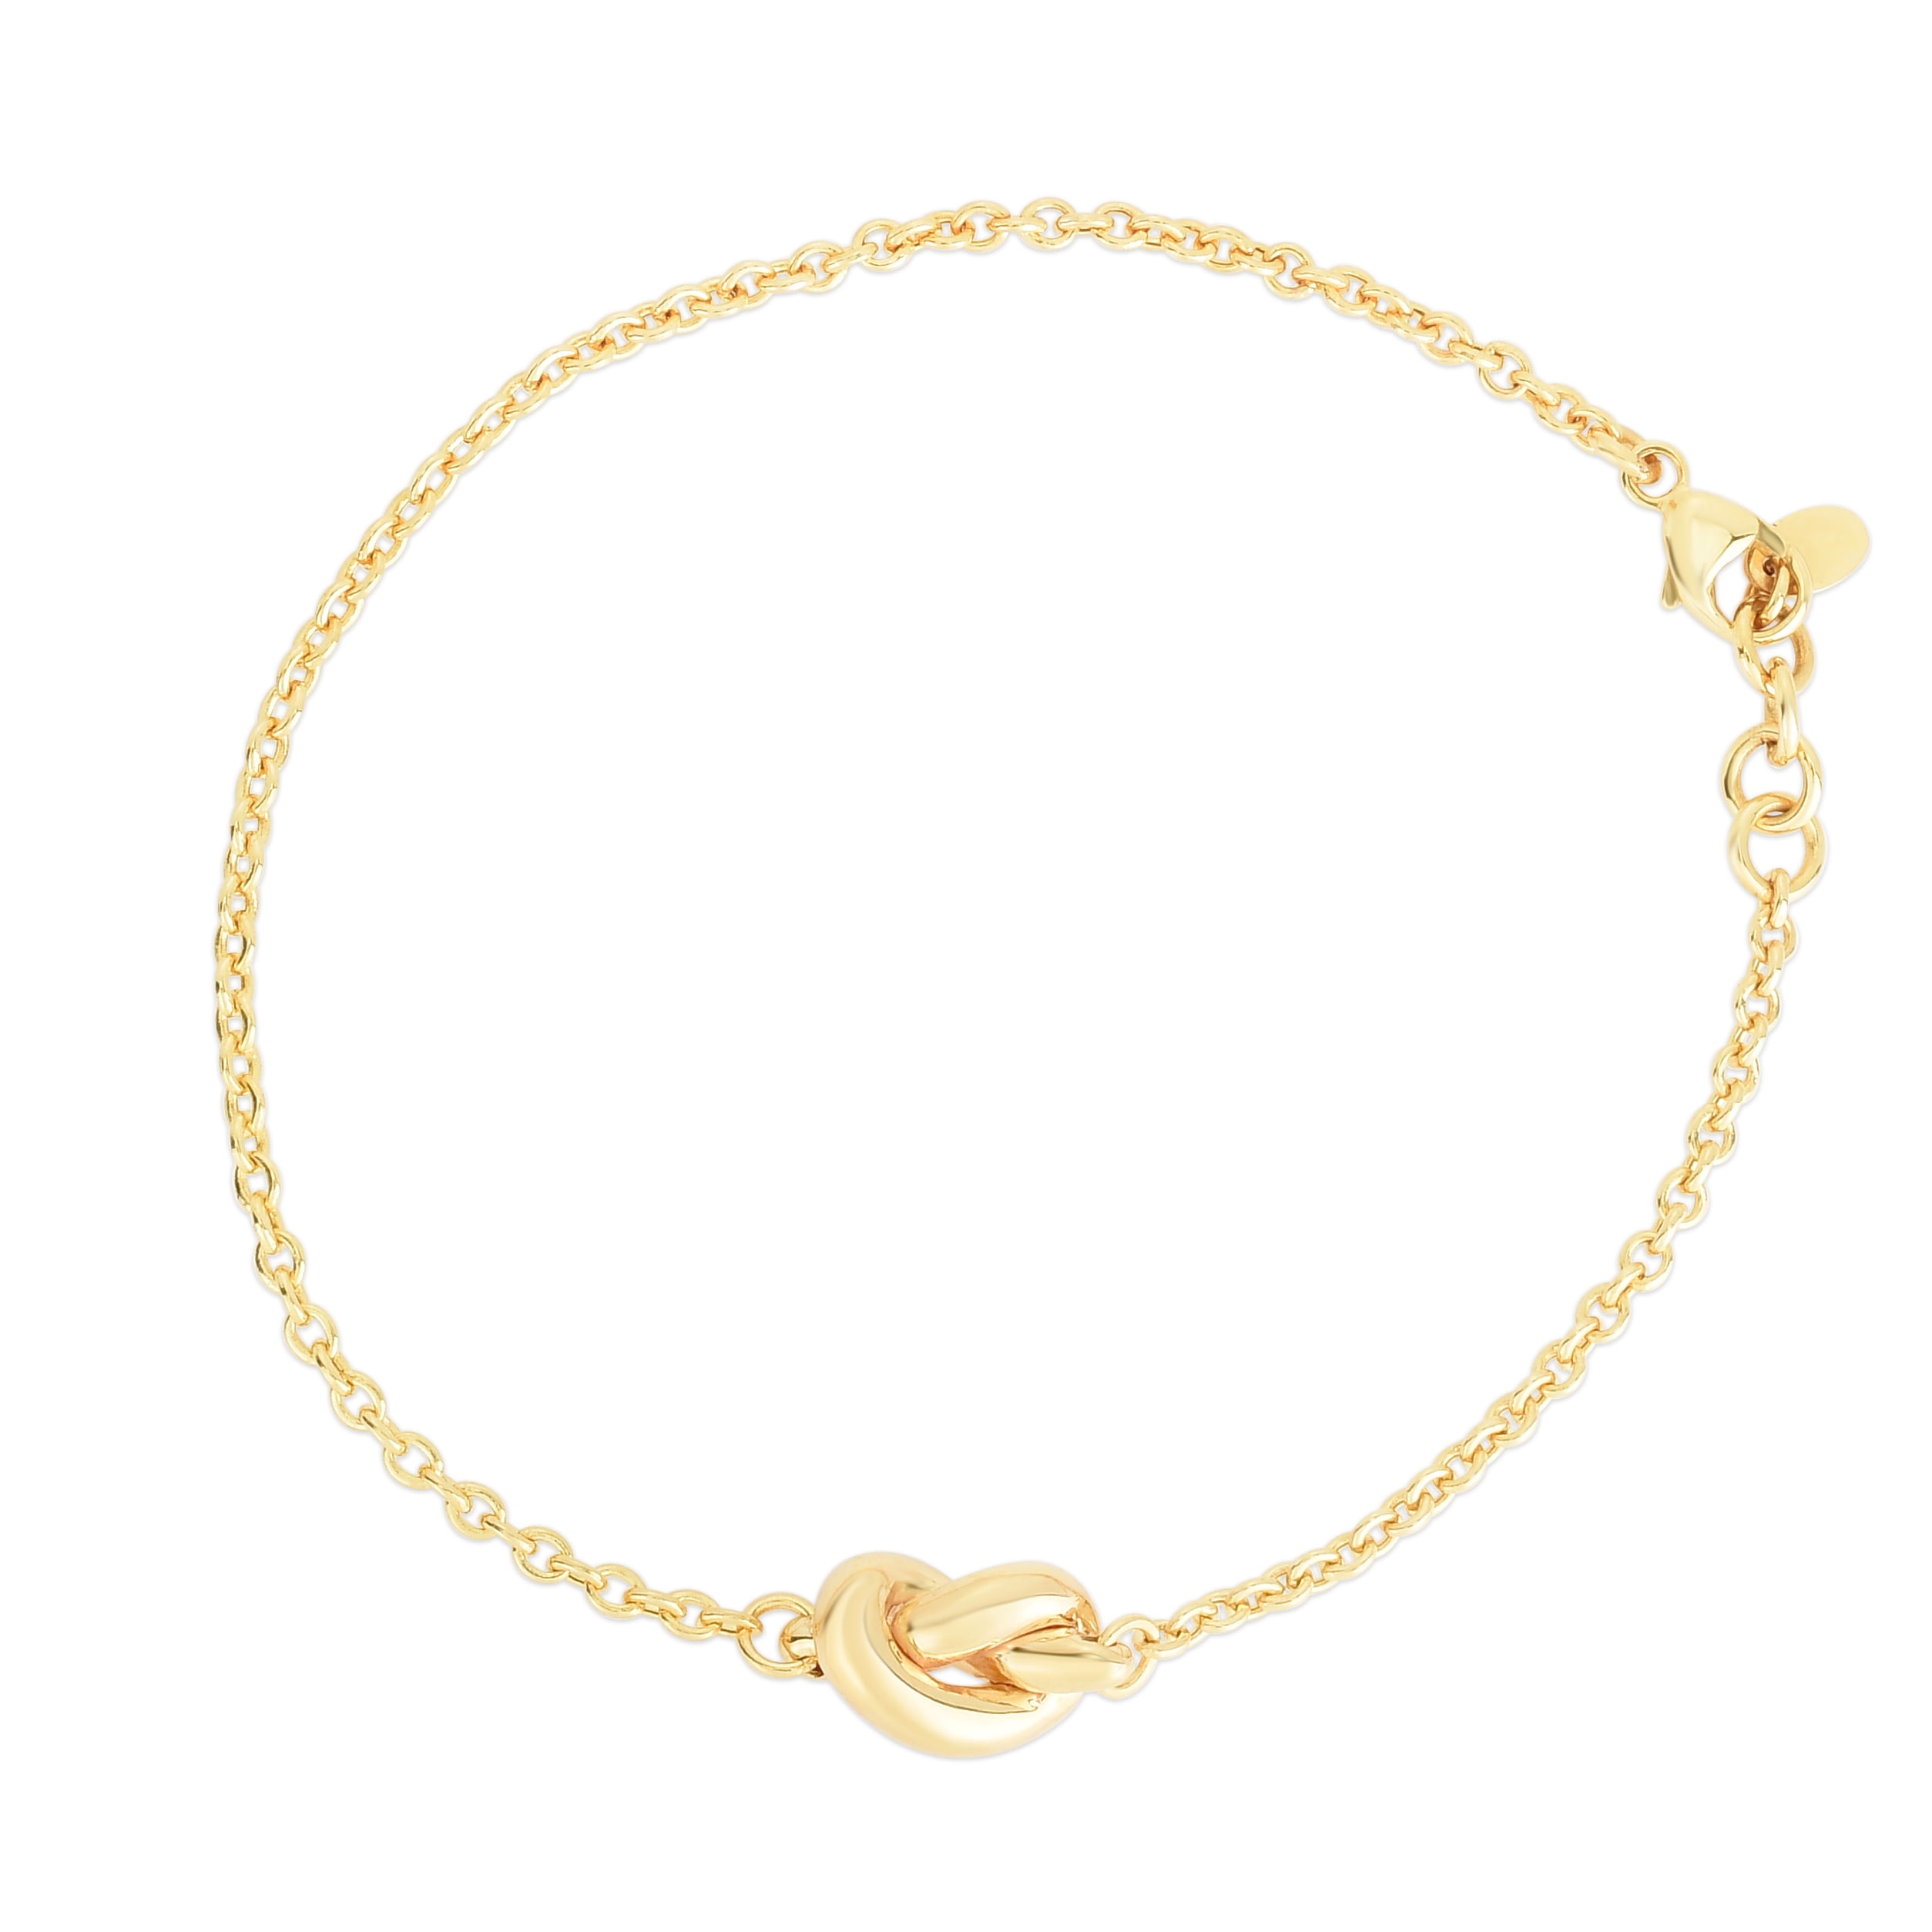 14K Yellow Gold Polish Knot Bracelet With Lobster Clasp 7in - Walmart.com